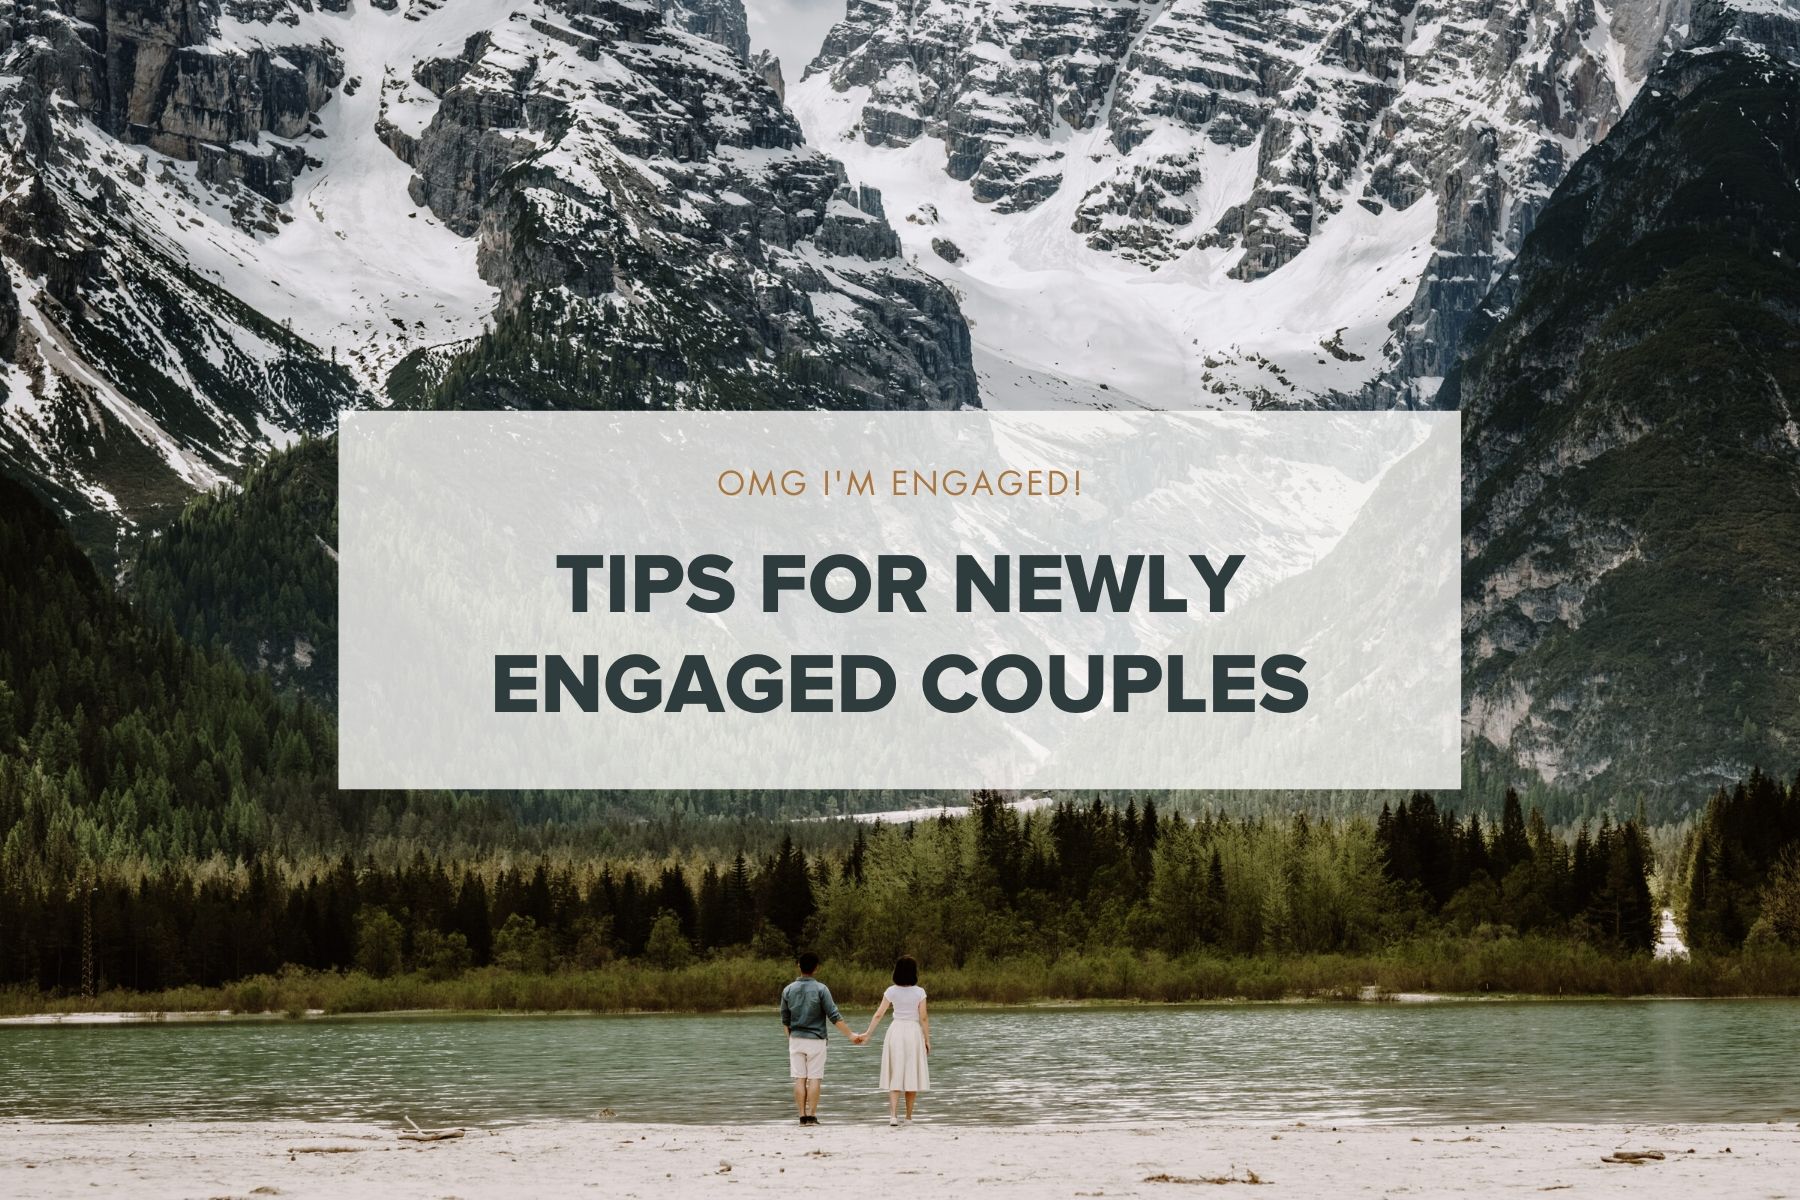 Tips for newly engaged couples